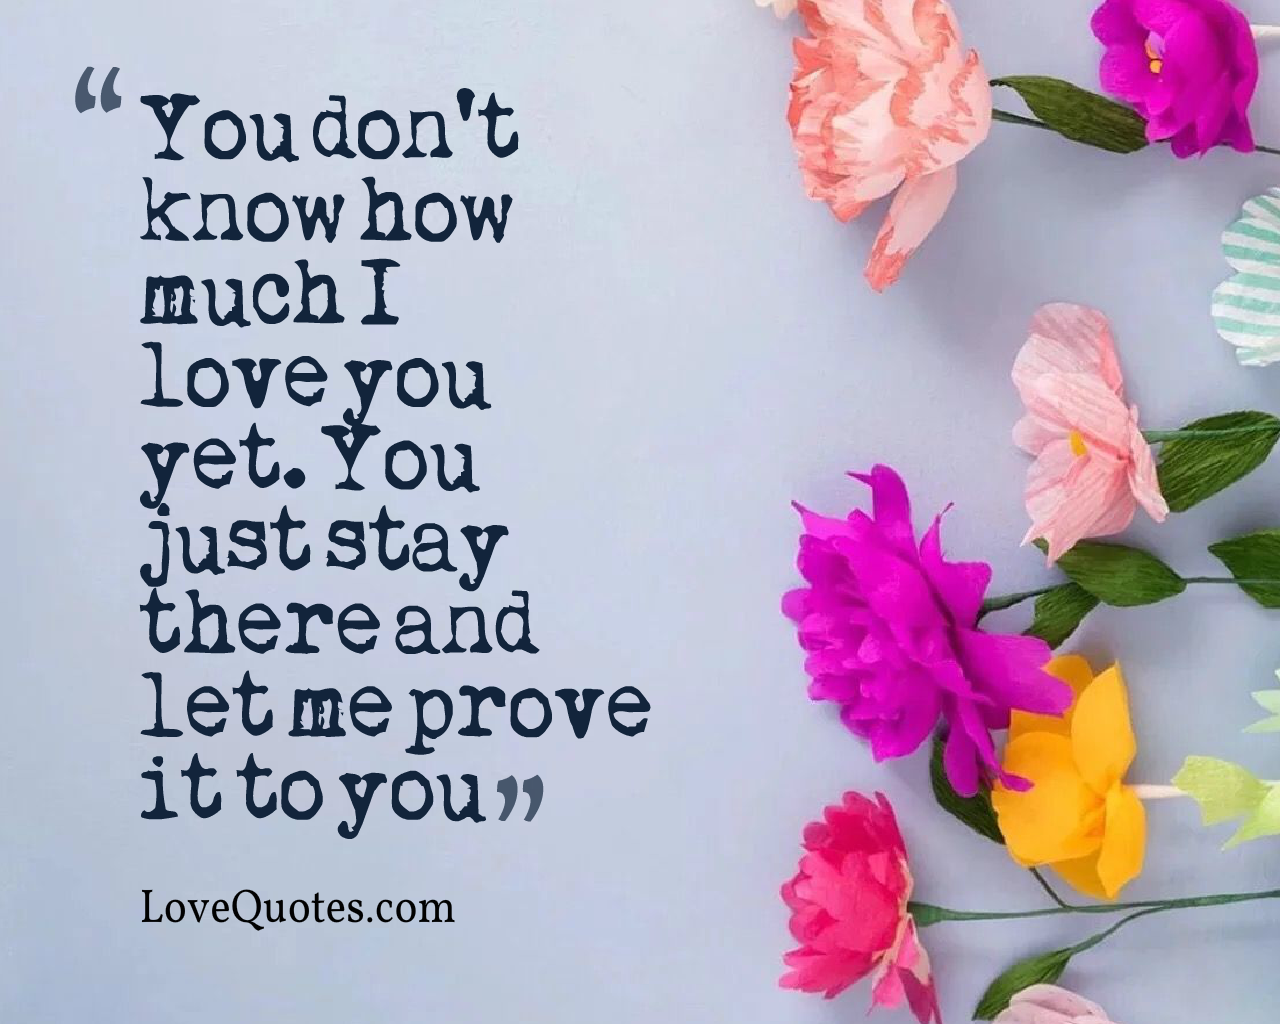 Just Stay There - Love Quotes